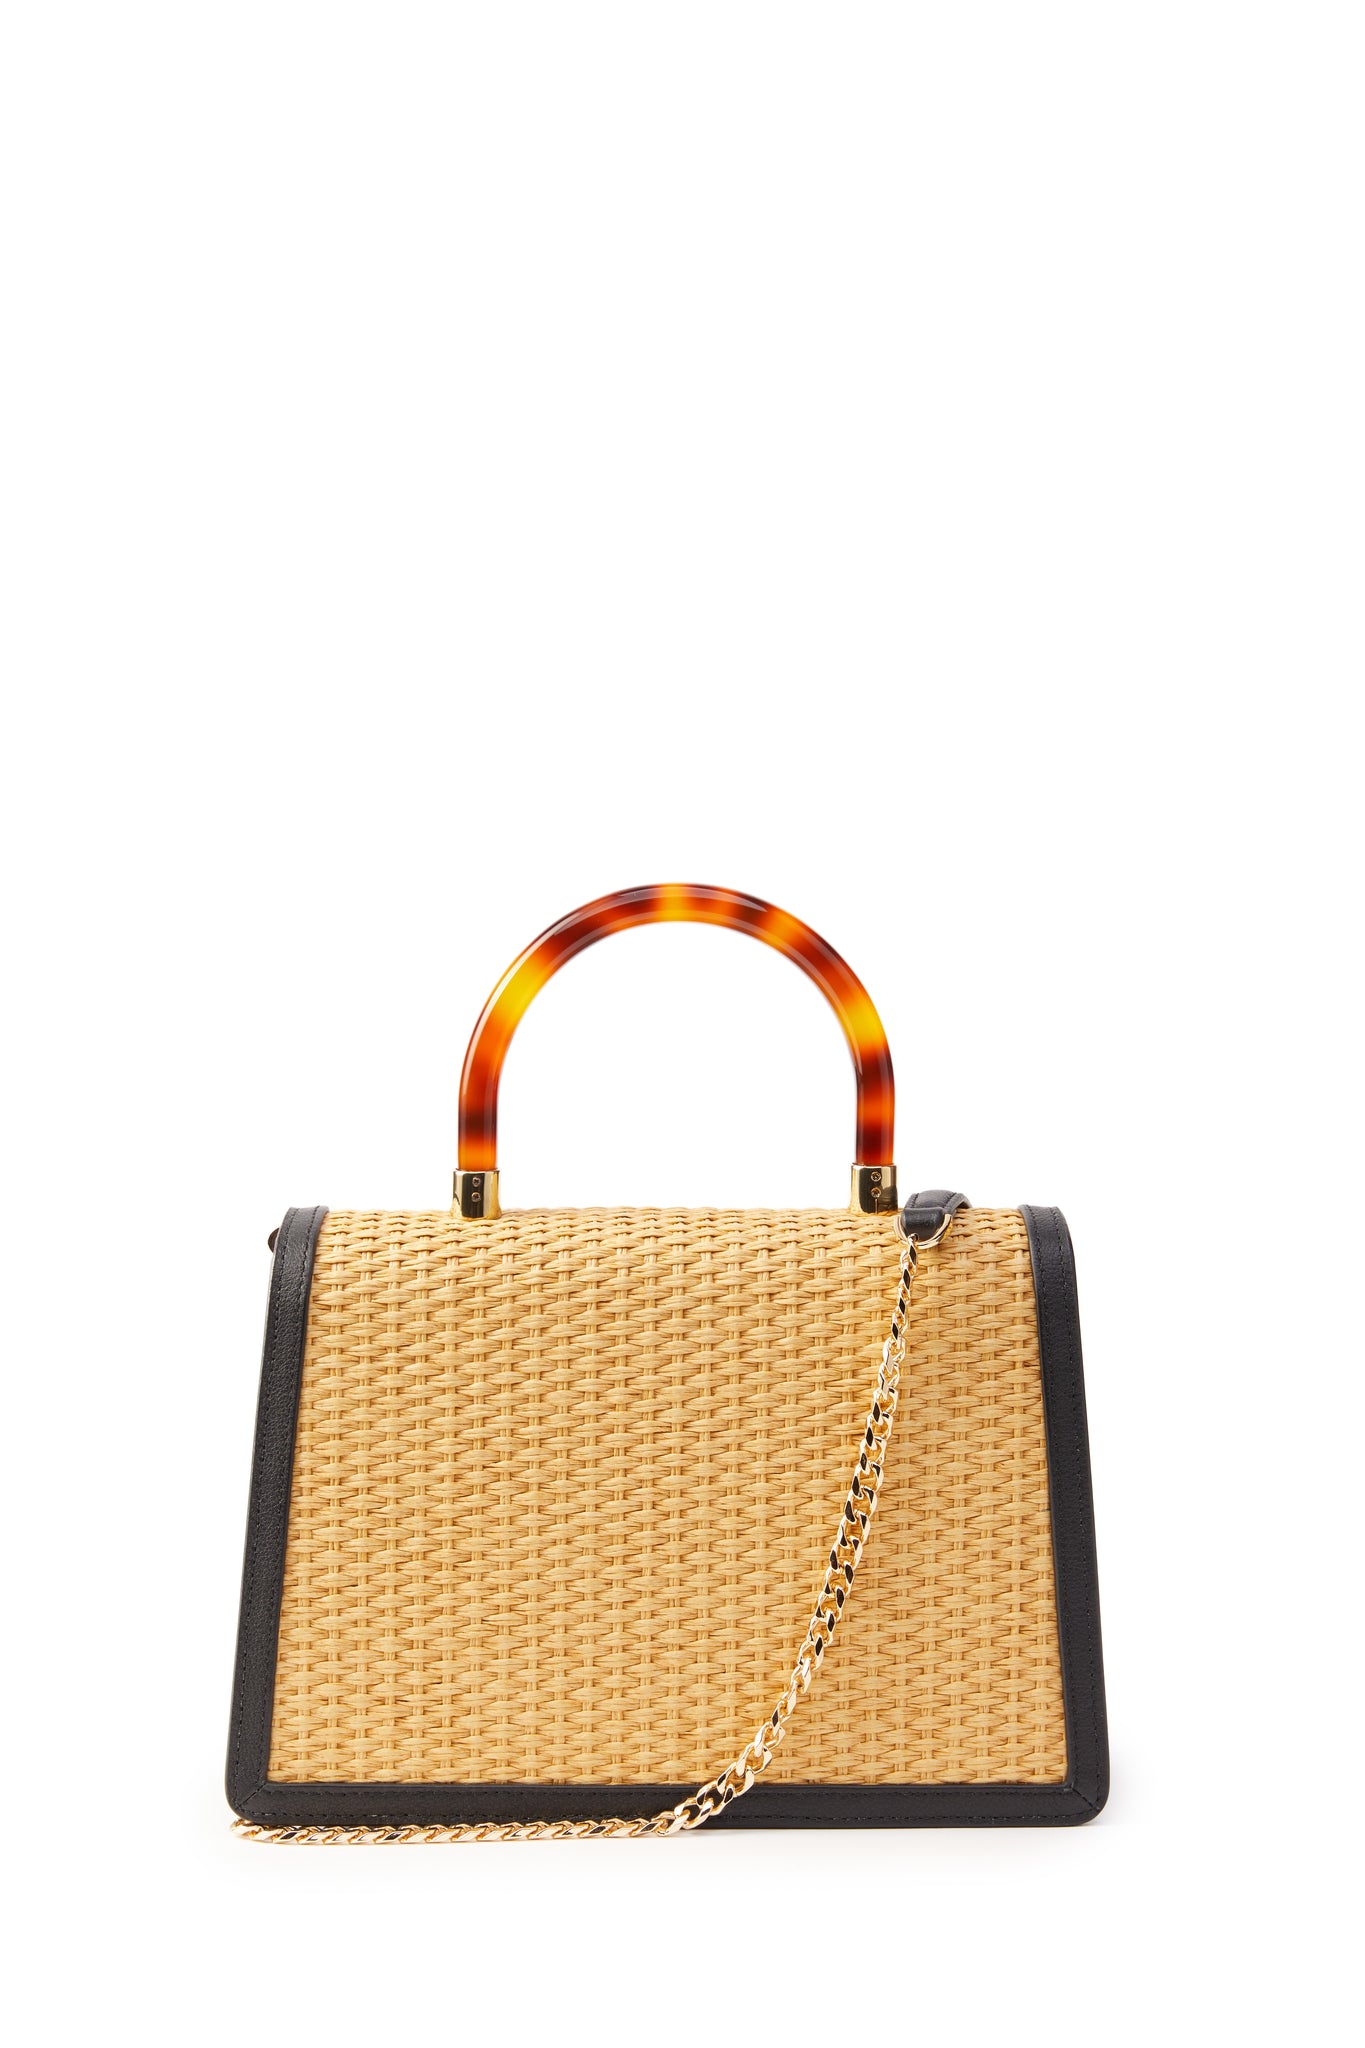 Back image of natural raffia bag with acetate tortoiseshell effect top handle and gold chain